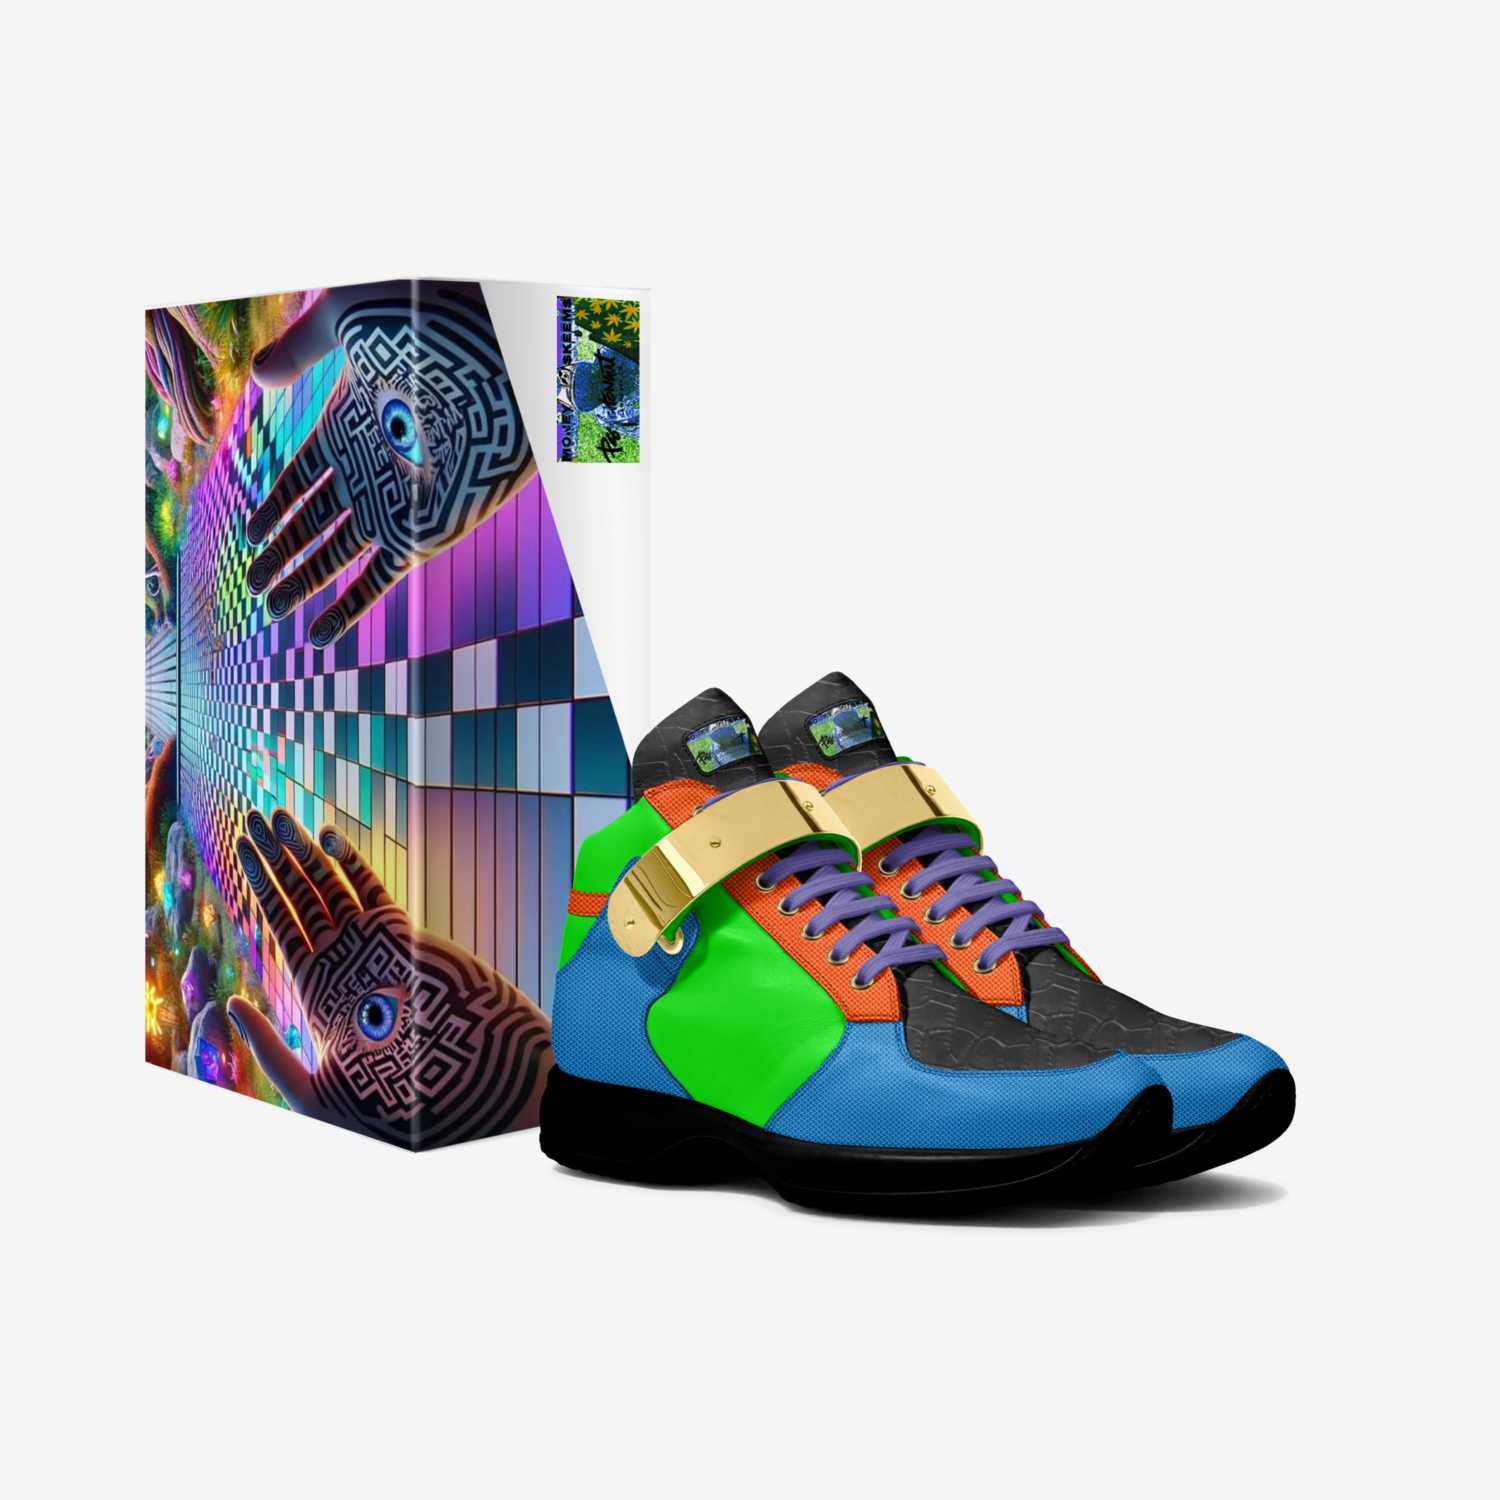 Higher Vibez custom made in Italy shoes by Michael Noblitt | Box view